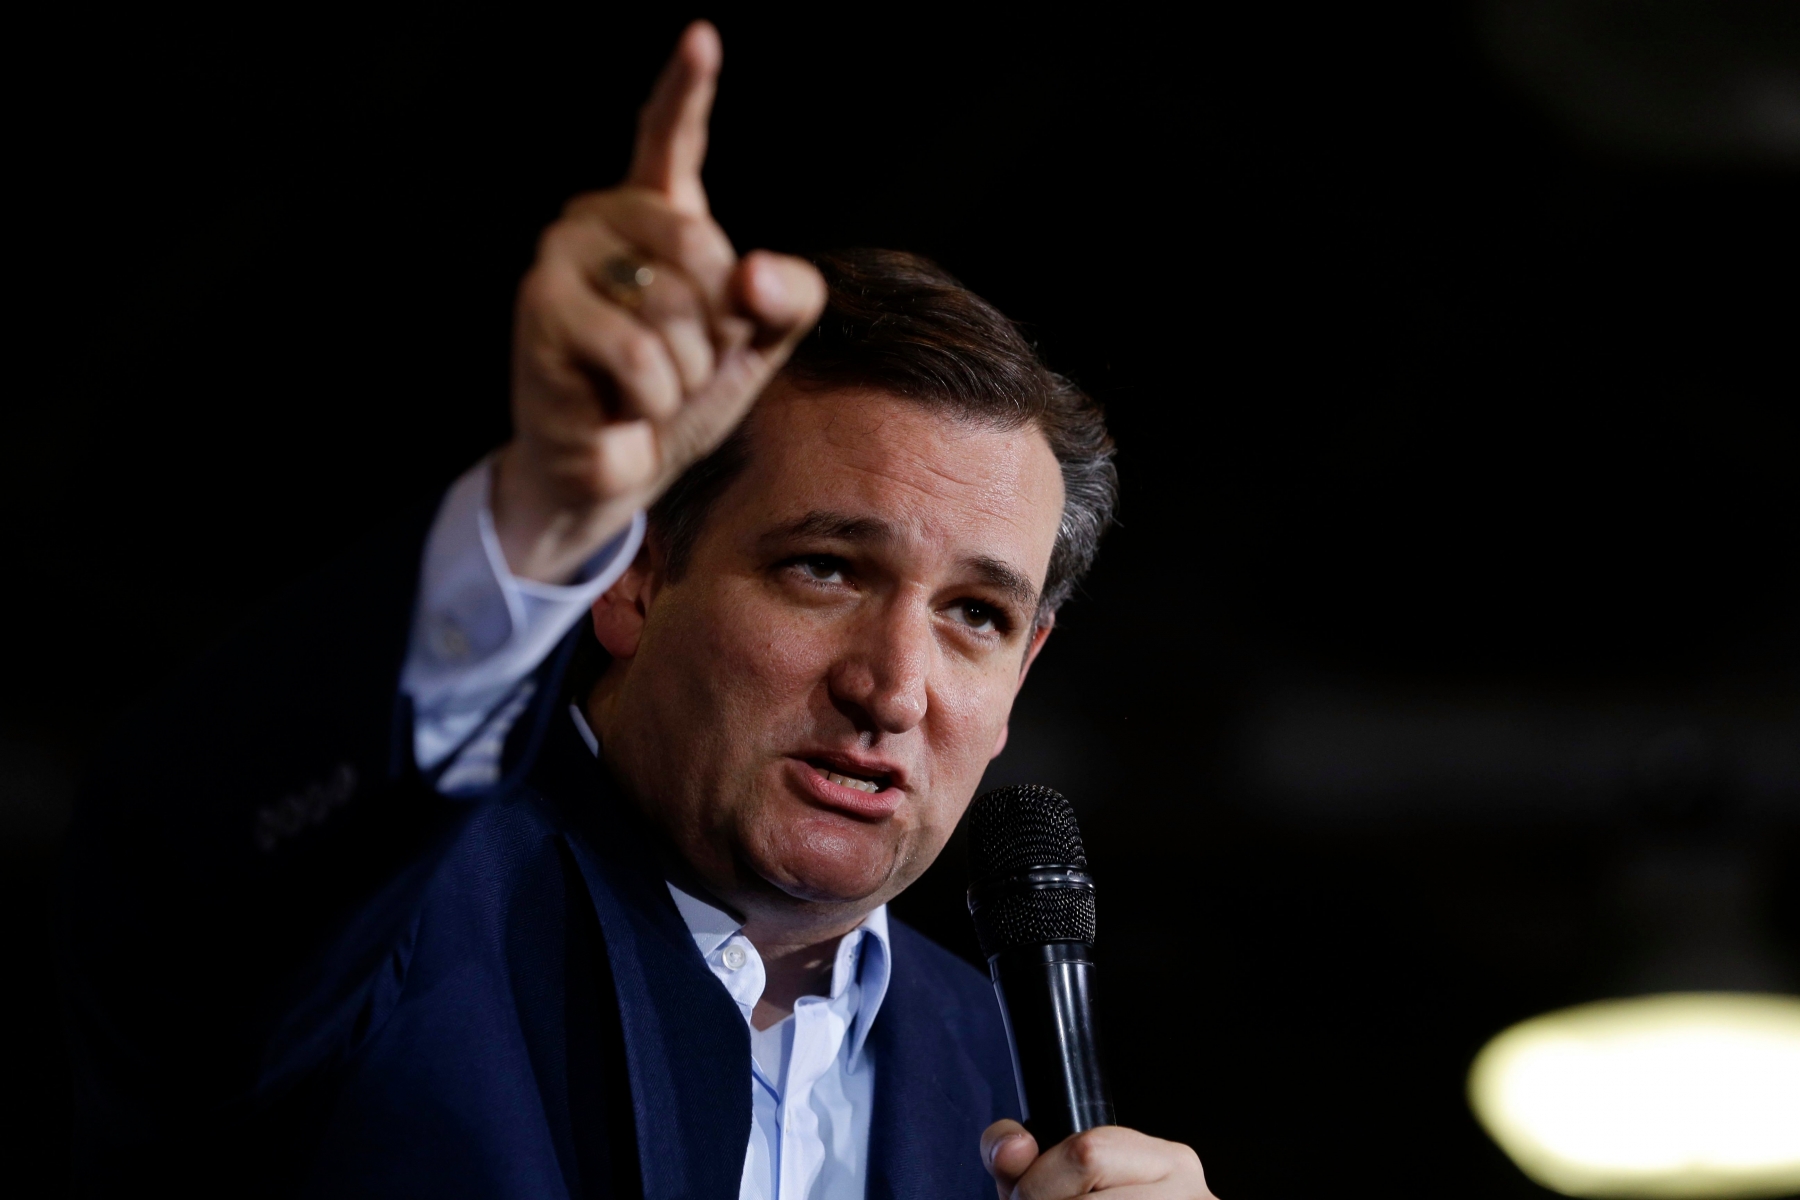 In this April 26, 2016, photo, Republican presidential candidate Sen. Ted Cruz, R-Texas, speaks during a rally at the Hoosier Gym in Knightstown, Ind. Cruz and Ohio Gov. John Kasich are having a tough time attracting establishment Republican donors even as they intensify their efforts to derail the nomination of billionaire Donald Trump. (AP Photo/Michael Conroy) GOP 2016 Donor Lockout